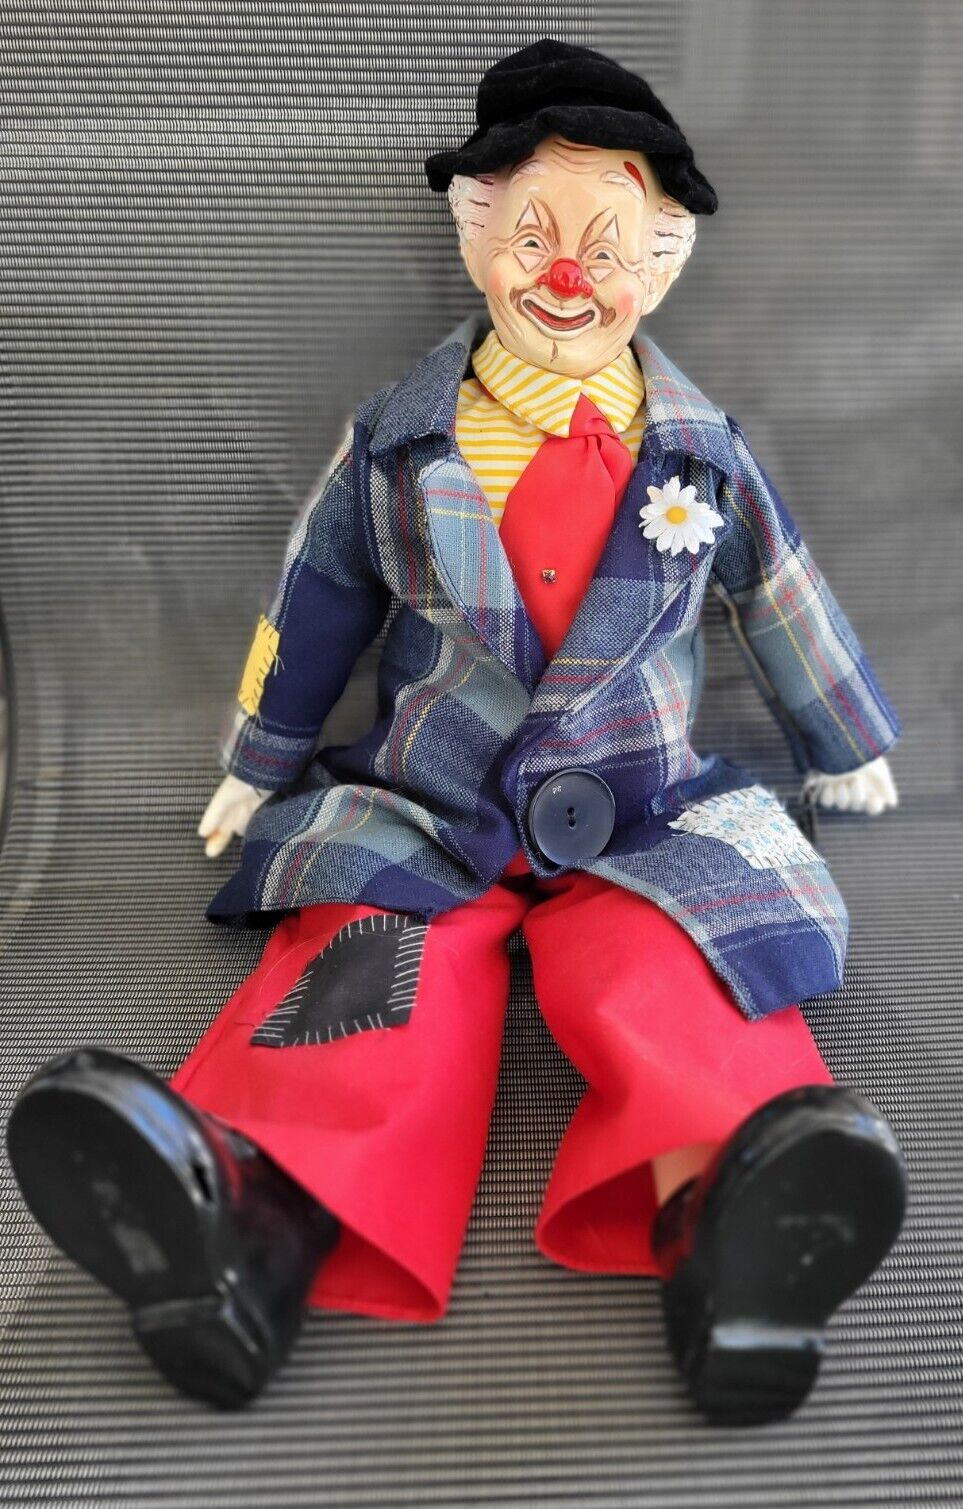 BRINNS LIMITED EDITION Porcelain, Wind-Up Musical Hobo Clown Excellent Condition